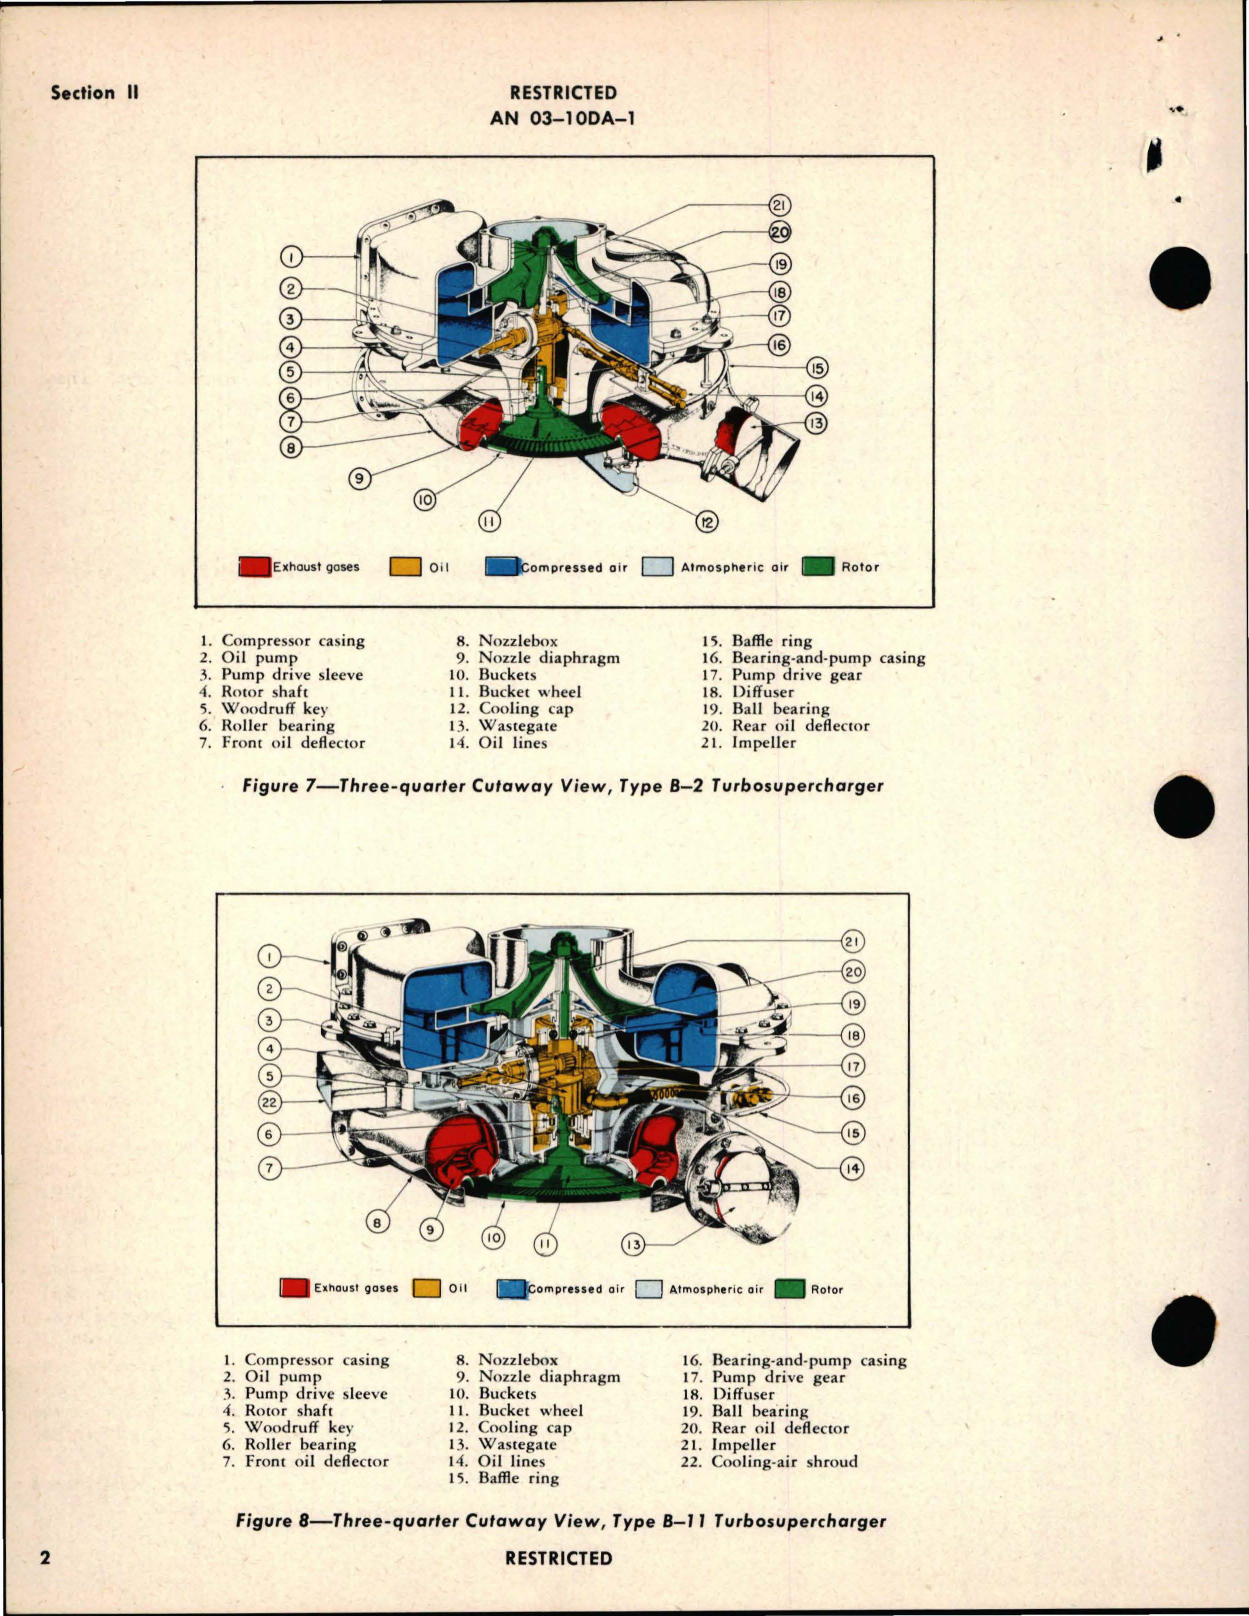 Sample page 8 from AirCorps Library document: Operation, Service and Overhaul Instructions with Parts Catalog for Turbosuperchargers - Types B-2, B-11, B-22, B-31, and B-33 